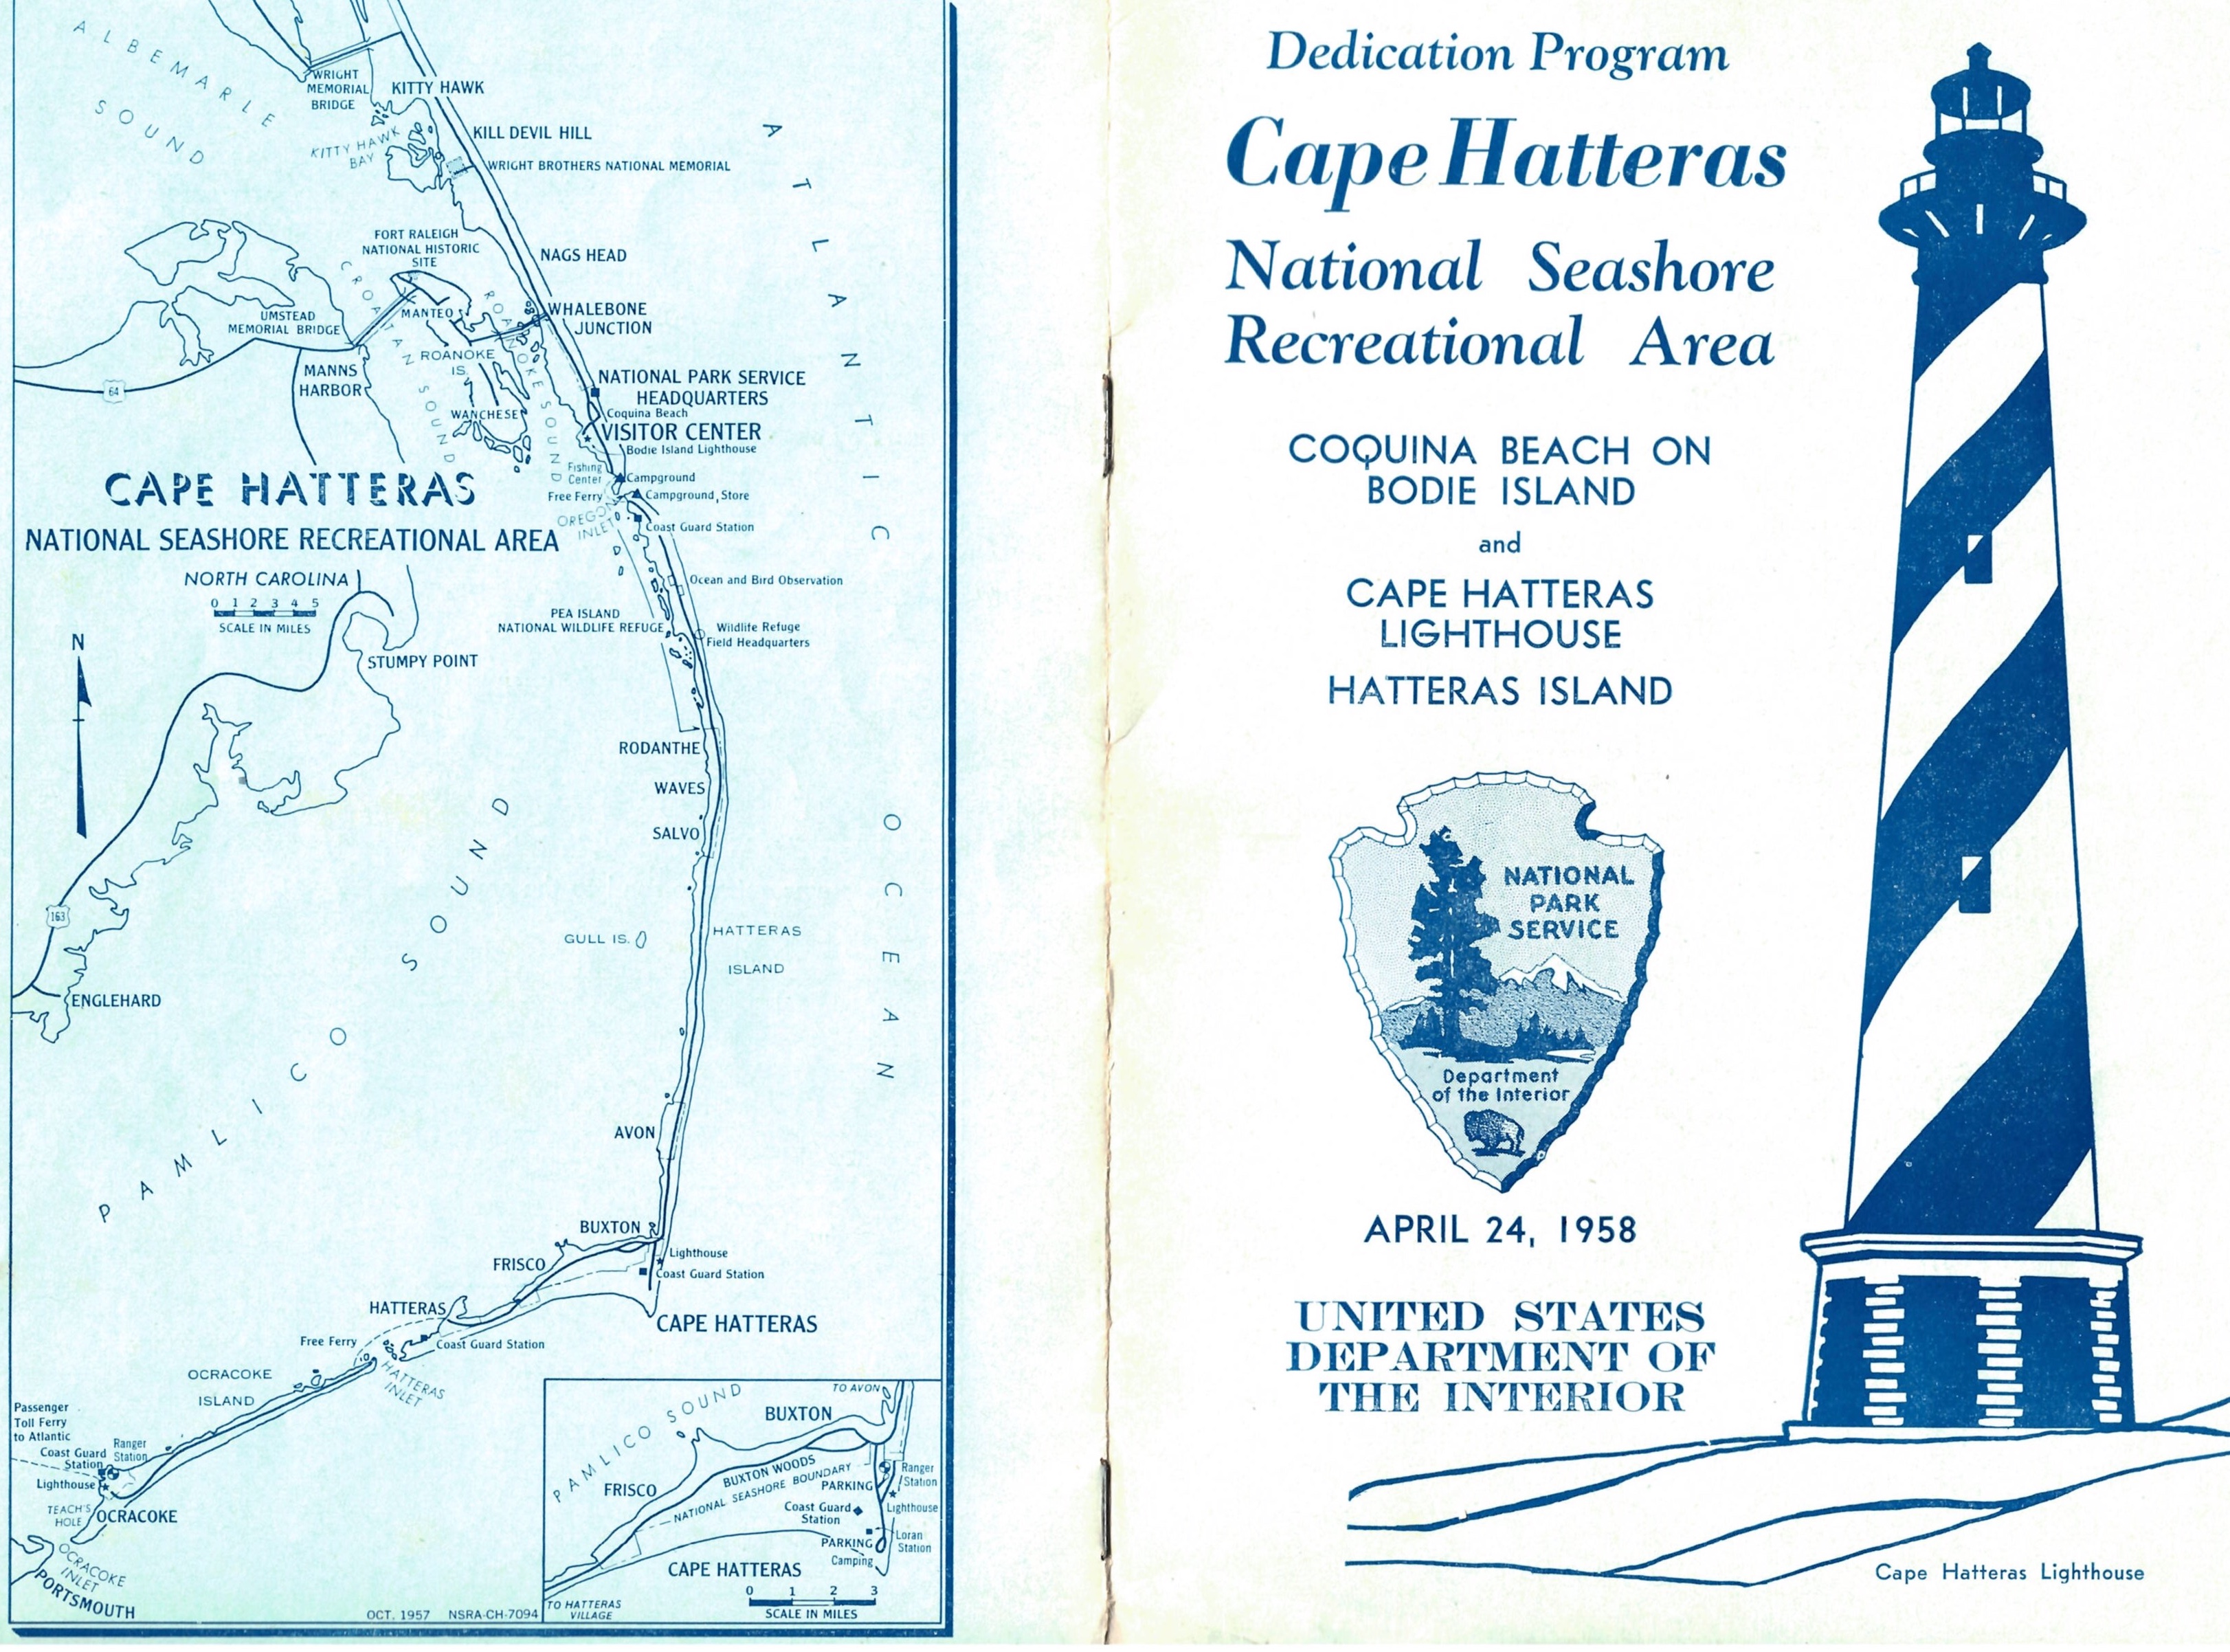 Front and back page of Dedication Program for Cape Hatteras National Seashore Recreational Area